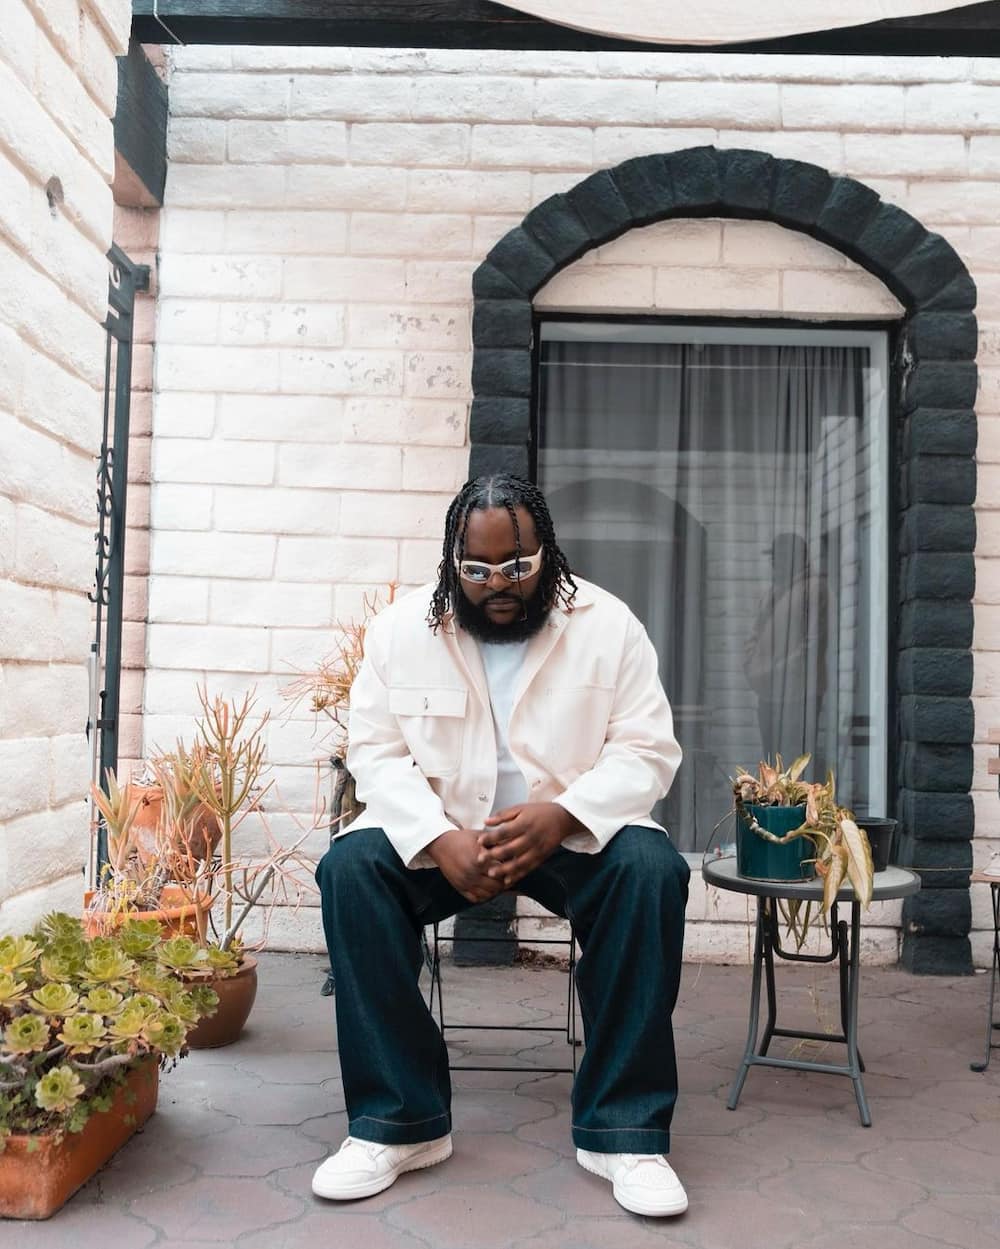 Bas announces his return to South Africa